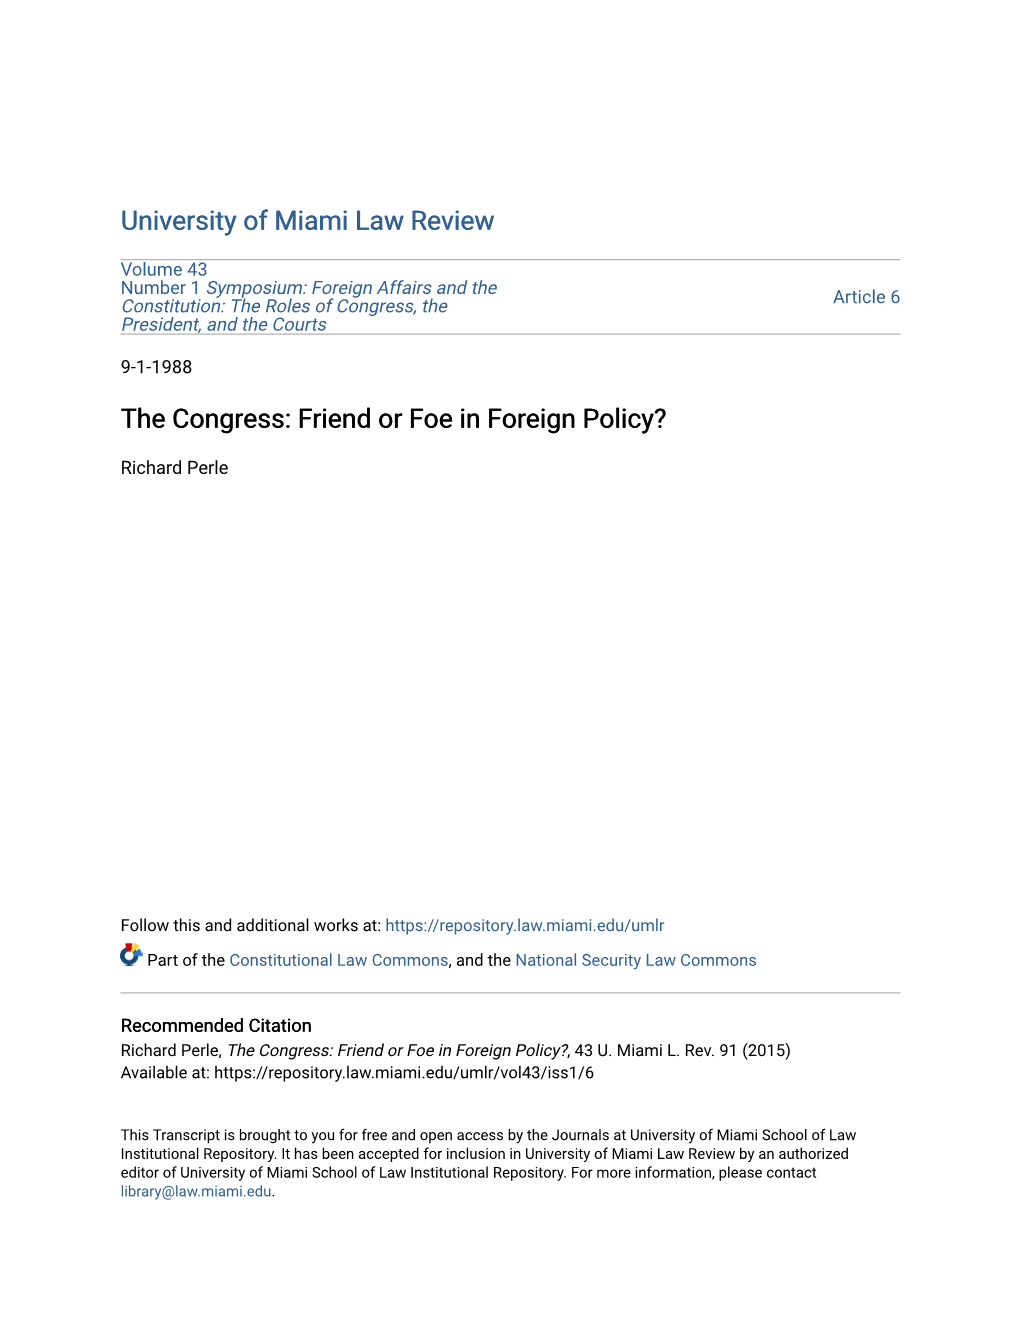 The Congress: Friend Or Foe in Foreign Policy?